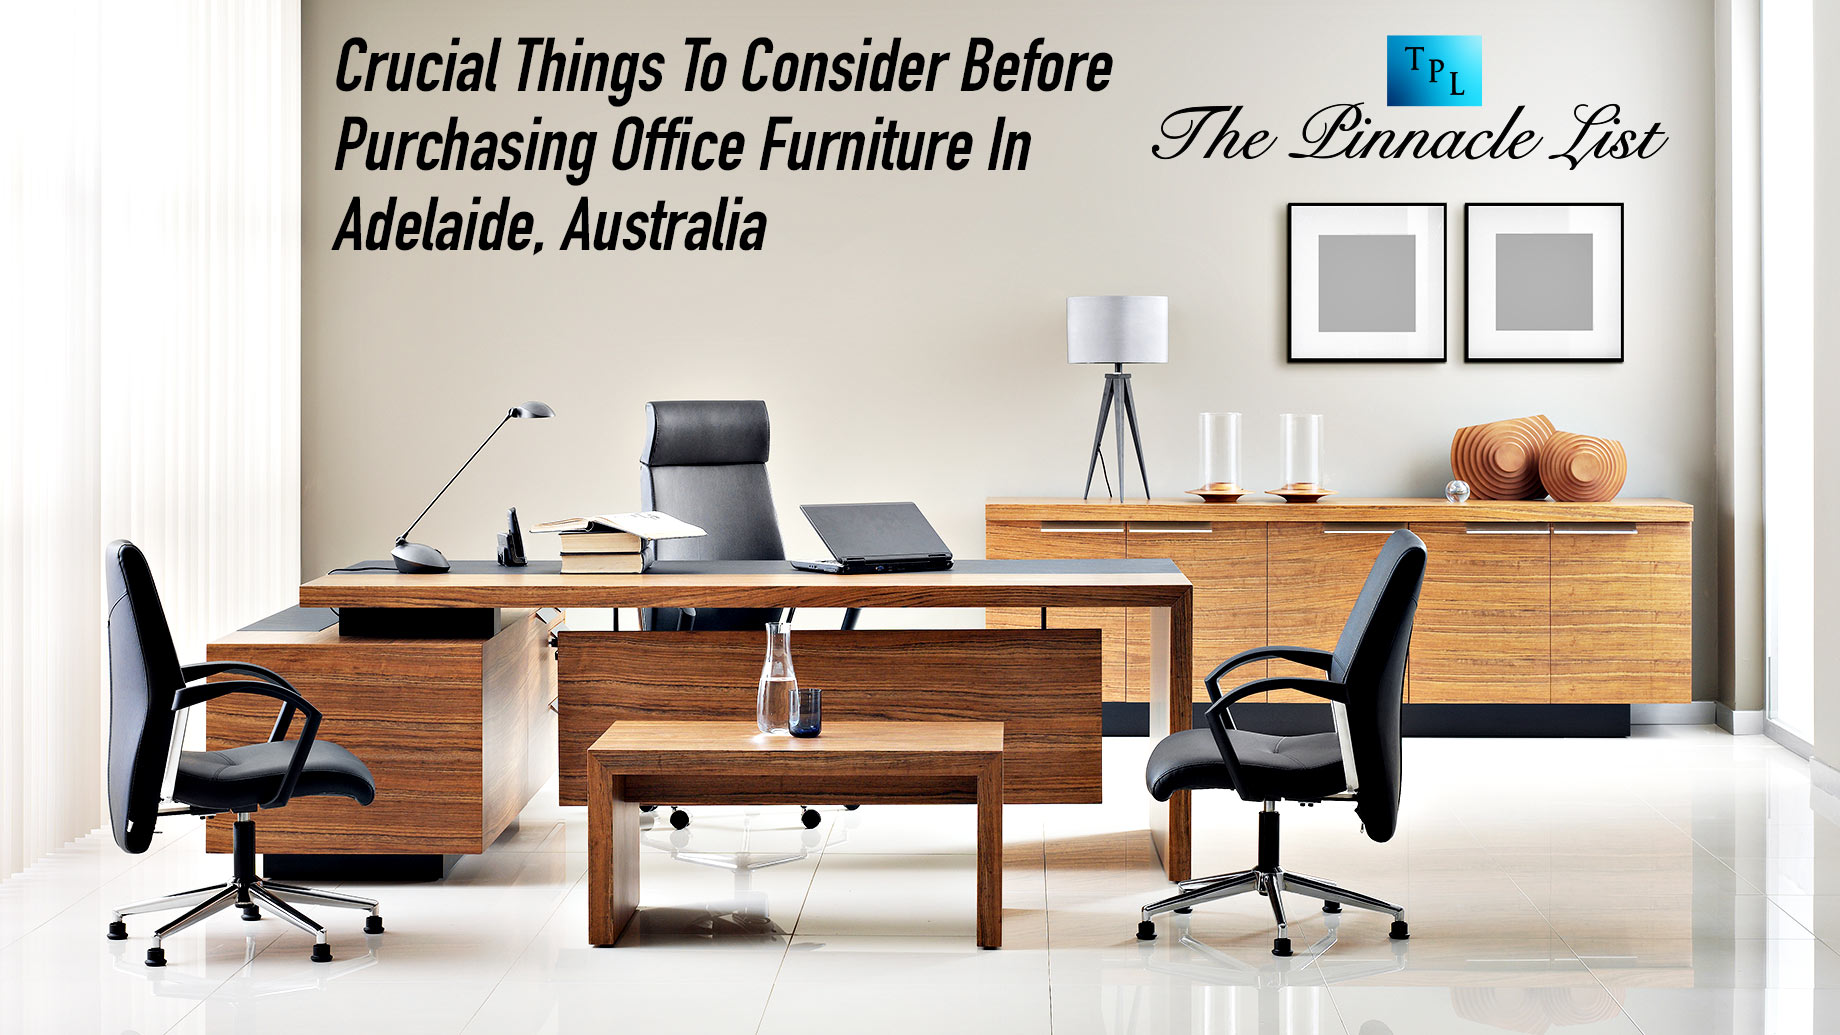 Crucial Things To Consider Before Purchasing Office Furniture In Adelaide, Australia